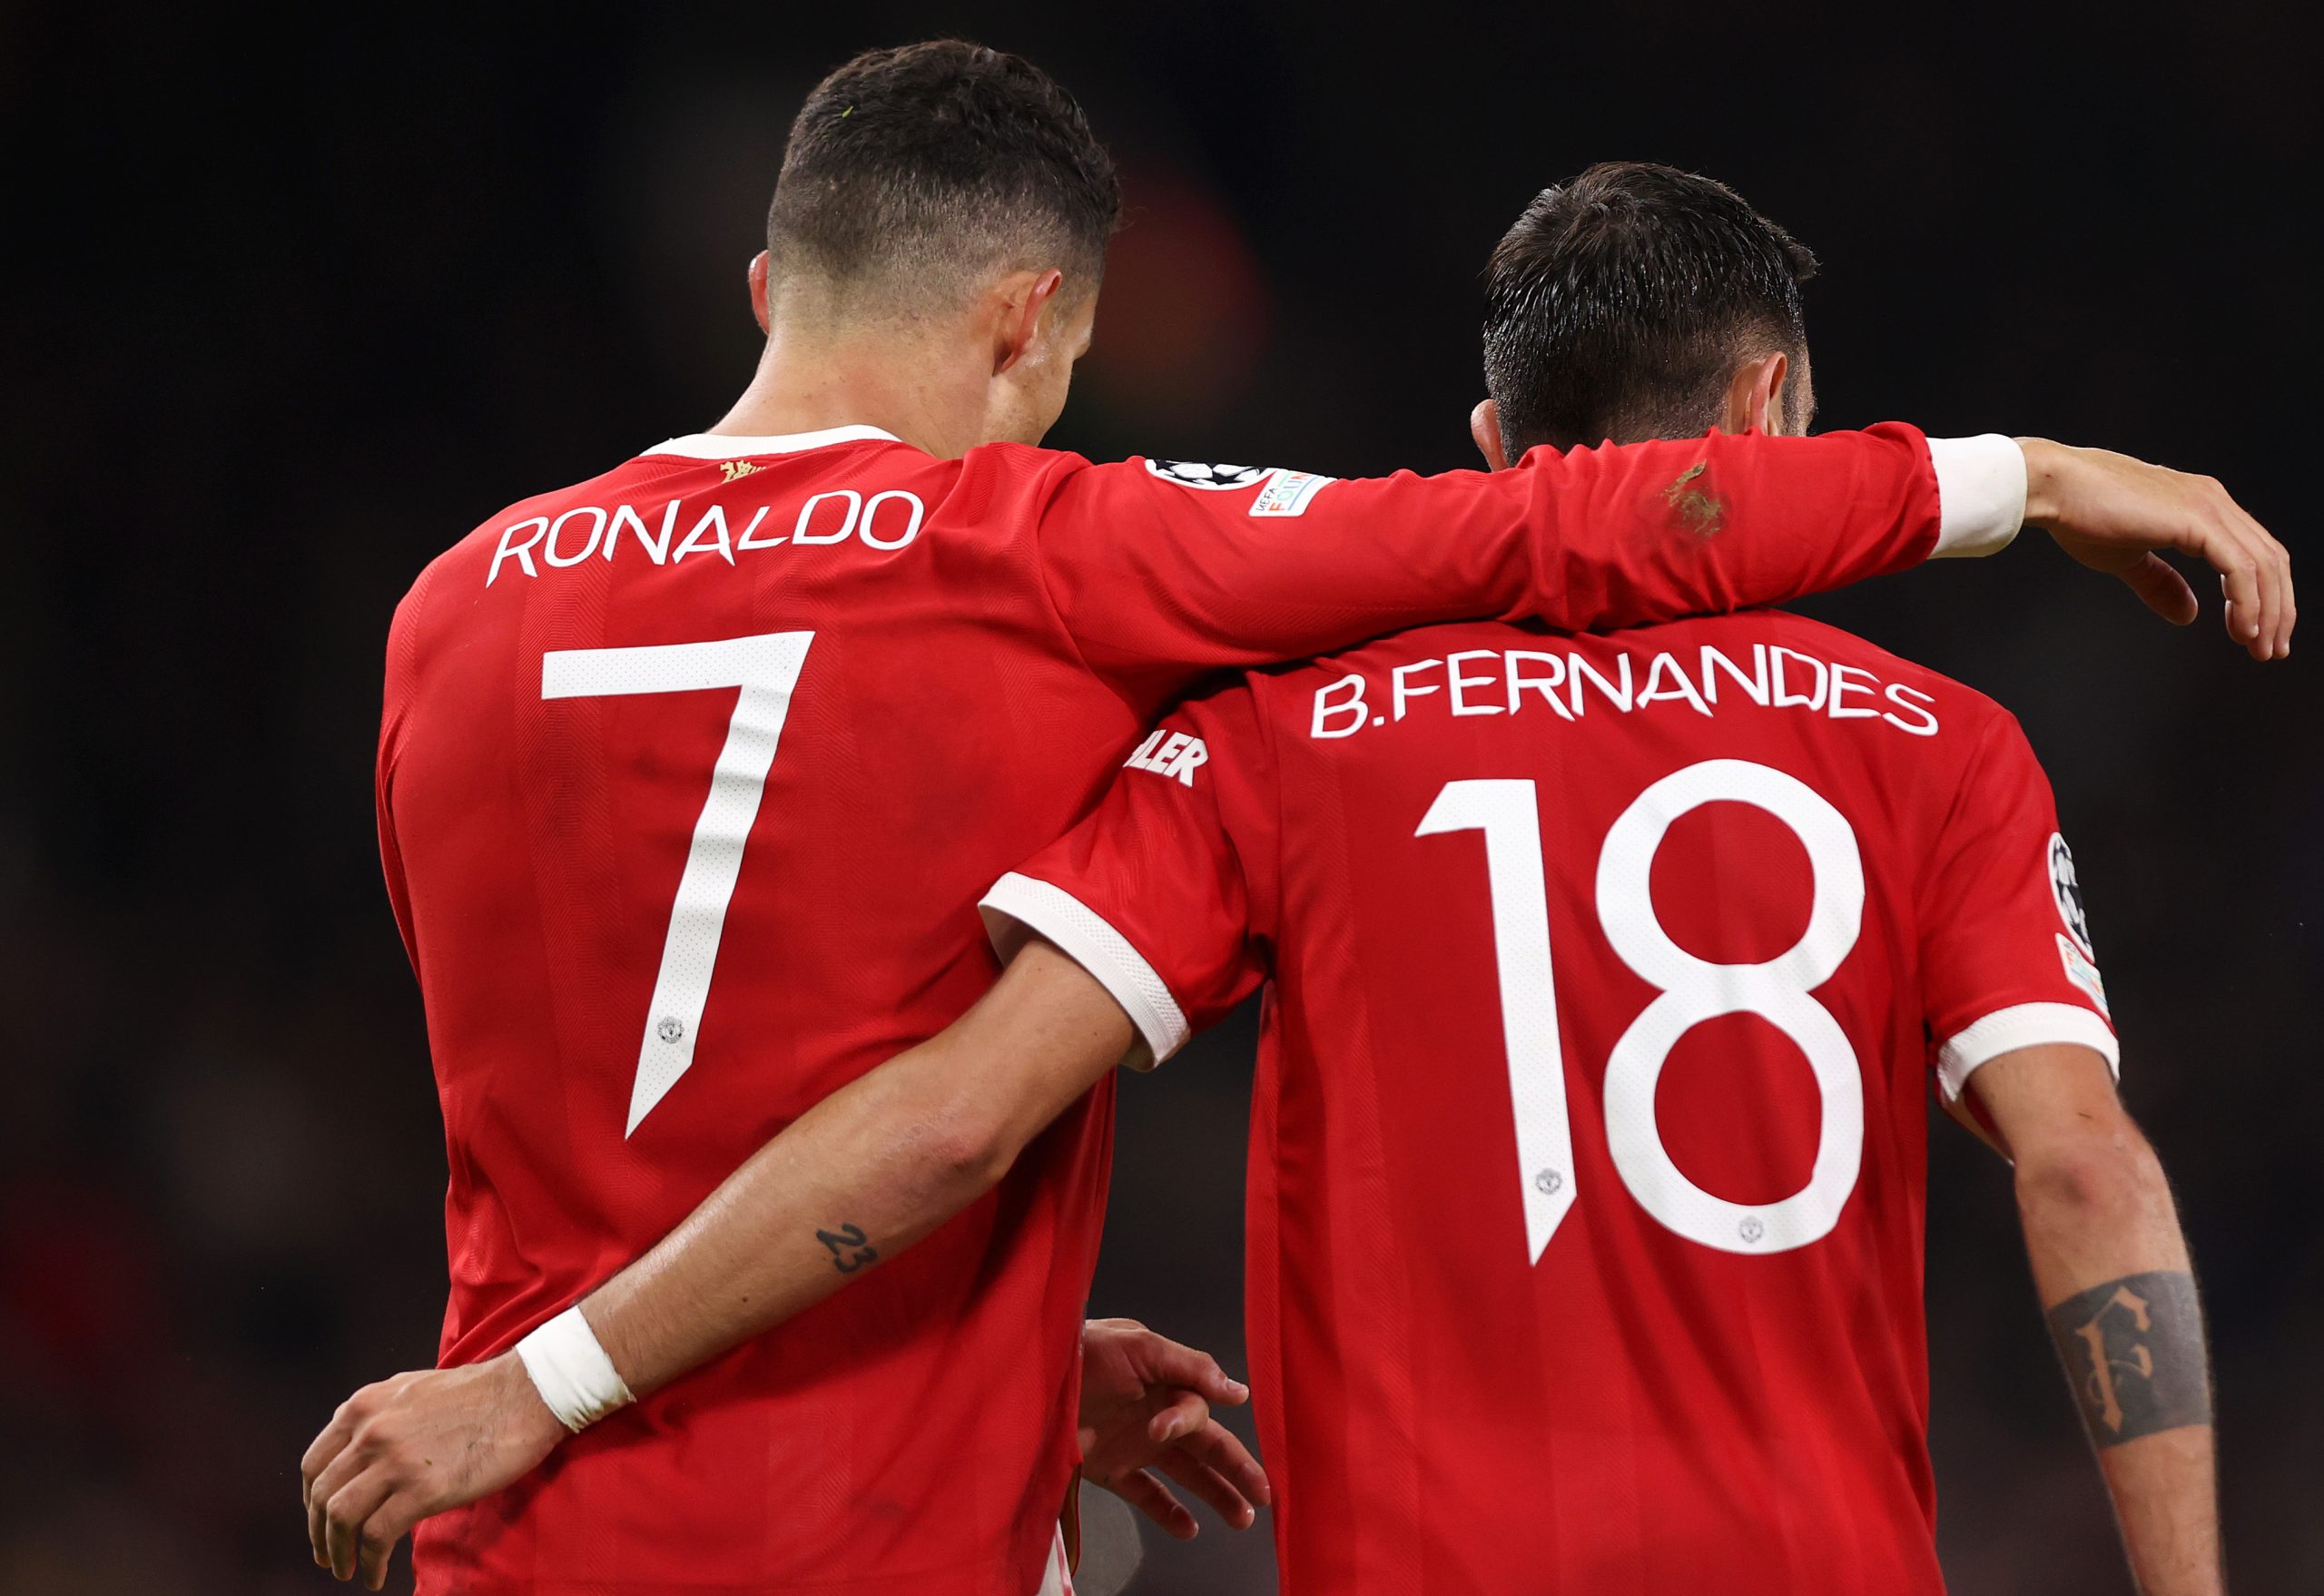 Bruno Fernandes has his say on the future of Manchester United star Cristiano Ronaldo.